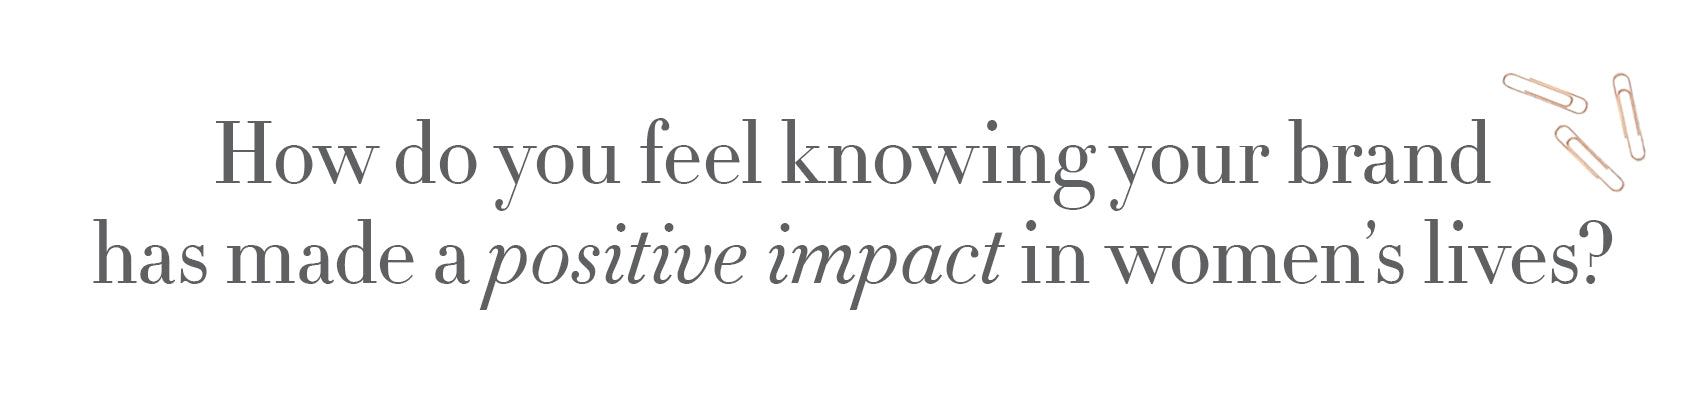 Typed text "How do you feel knowing your brand has made a positive impact in women’s lives?"